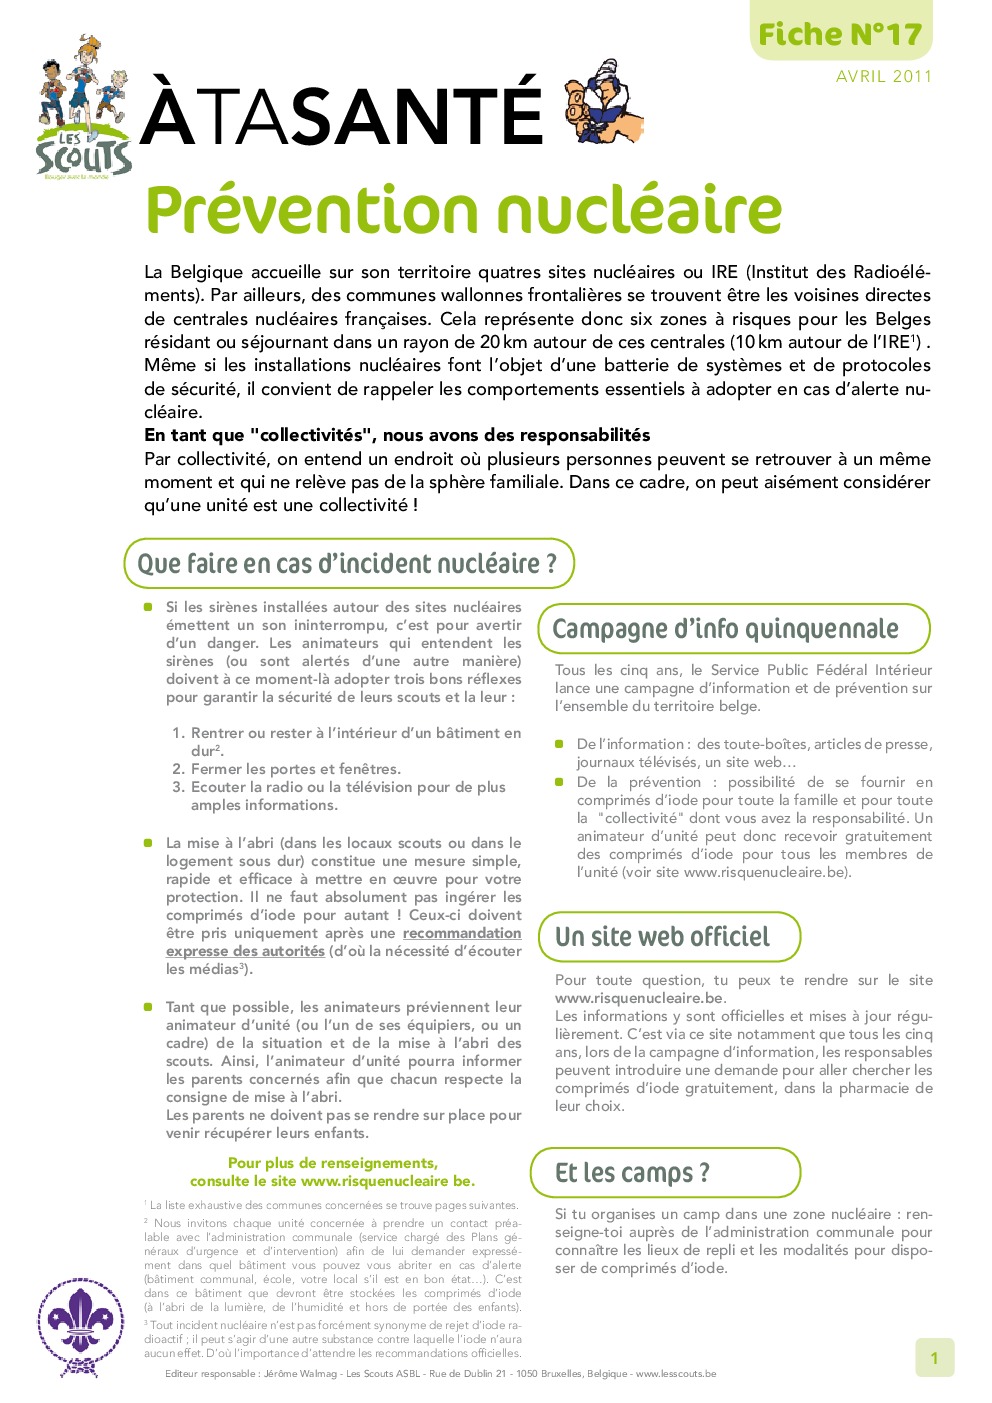 ATS_17_Prevention_nucleaire.pdf